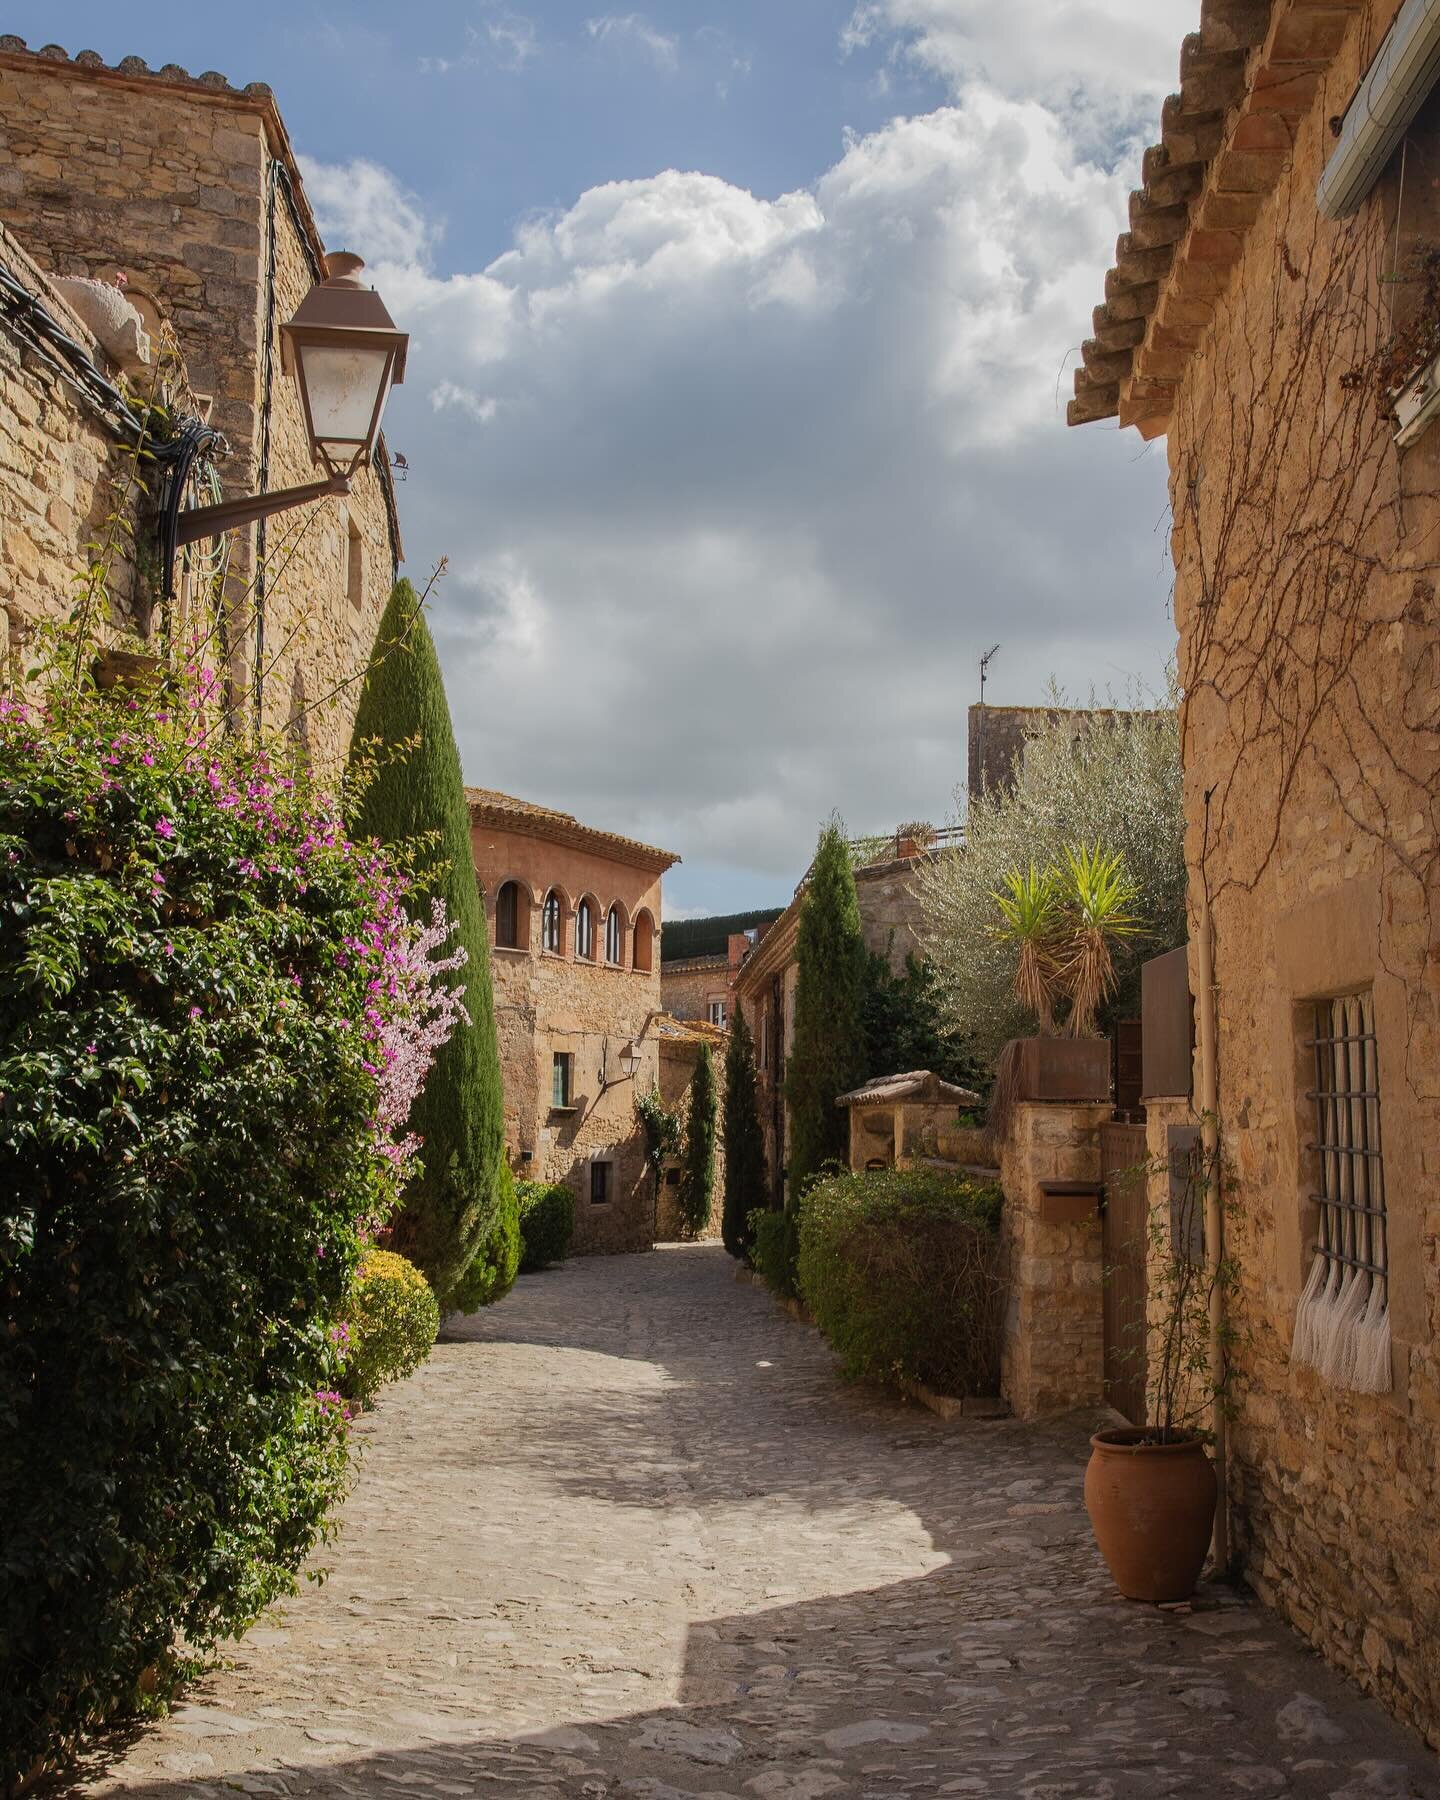 Exploring Empord&agrave; and Costa Brava in the north of Spain. From the snowcapped Pyrenees to the turquoise Mediterranean Sea, this region is beyond beautiful &mdash; and offers so much more than the popular tourist cities by the sea. 

We explored